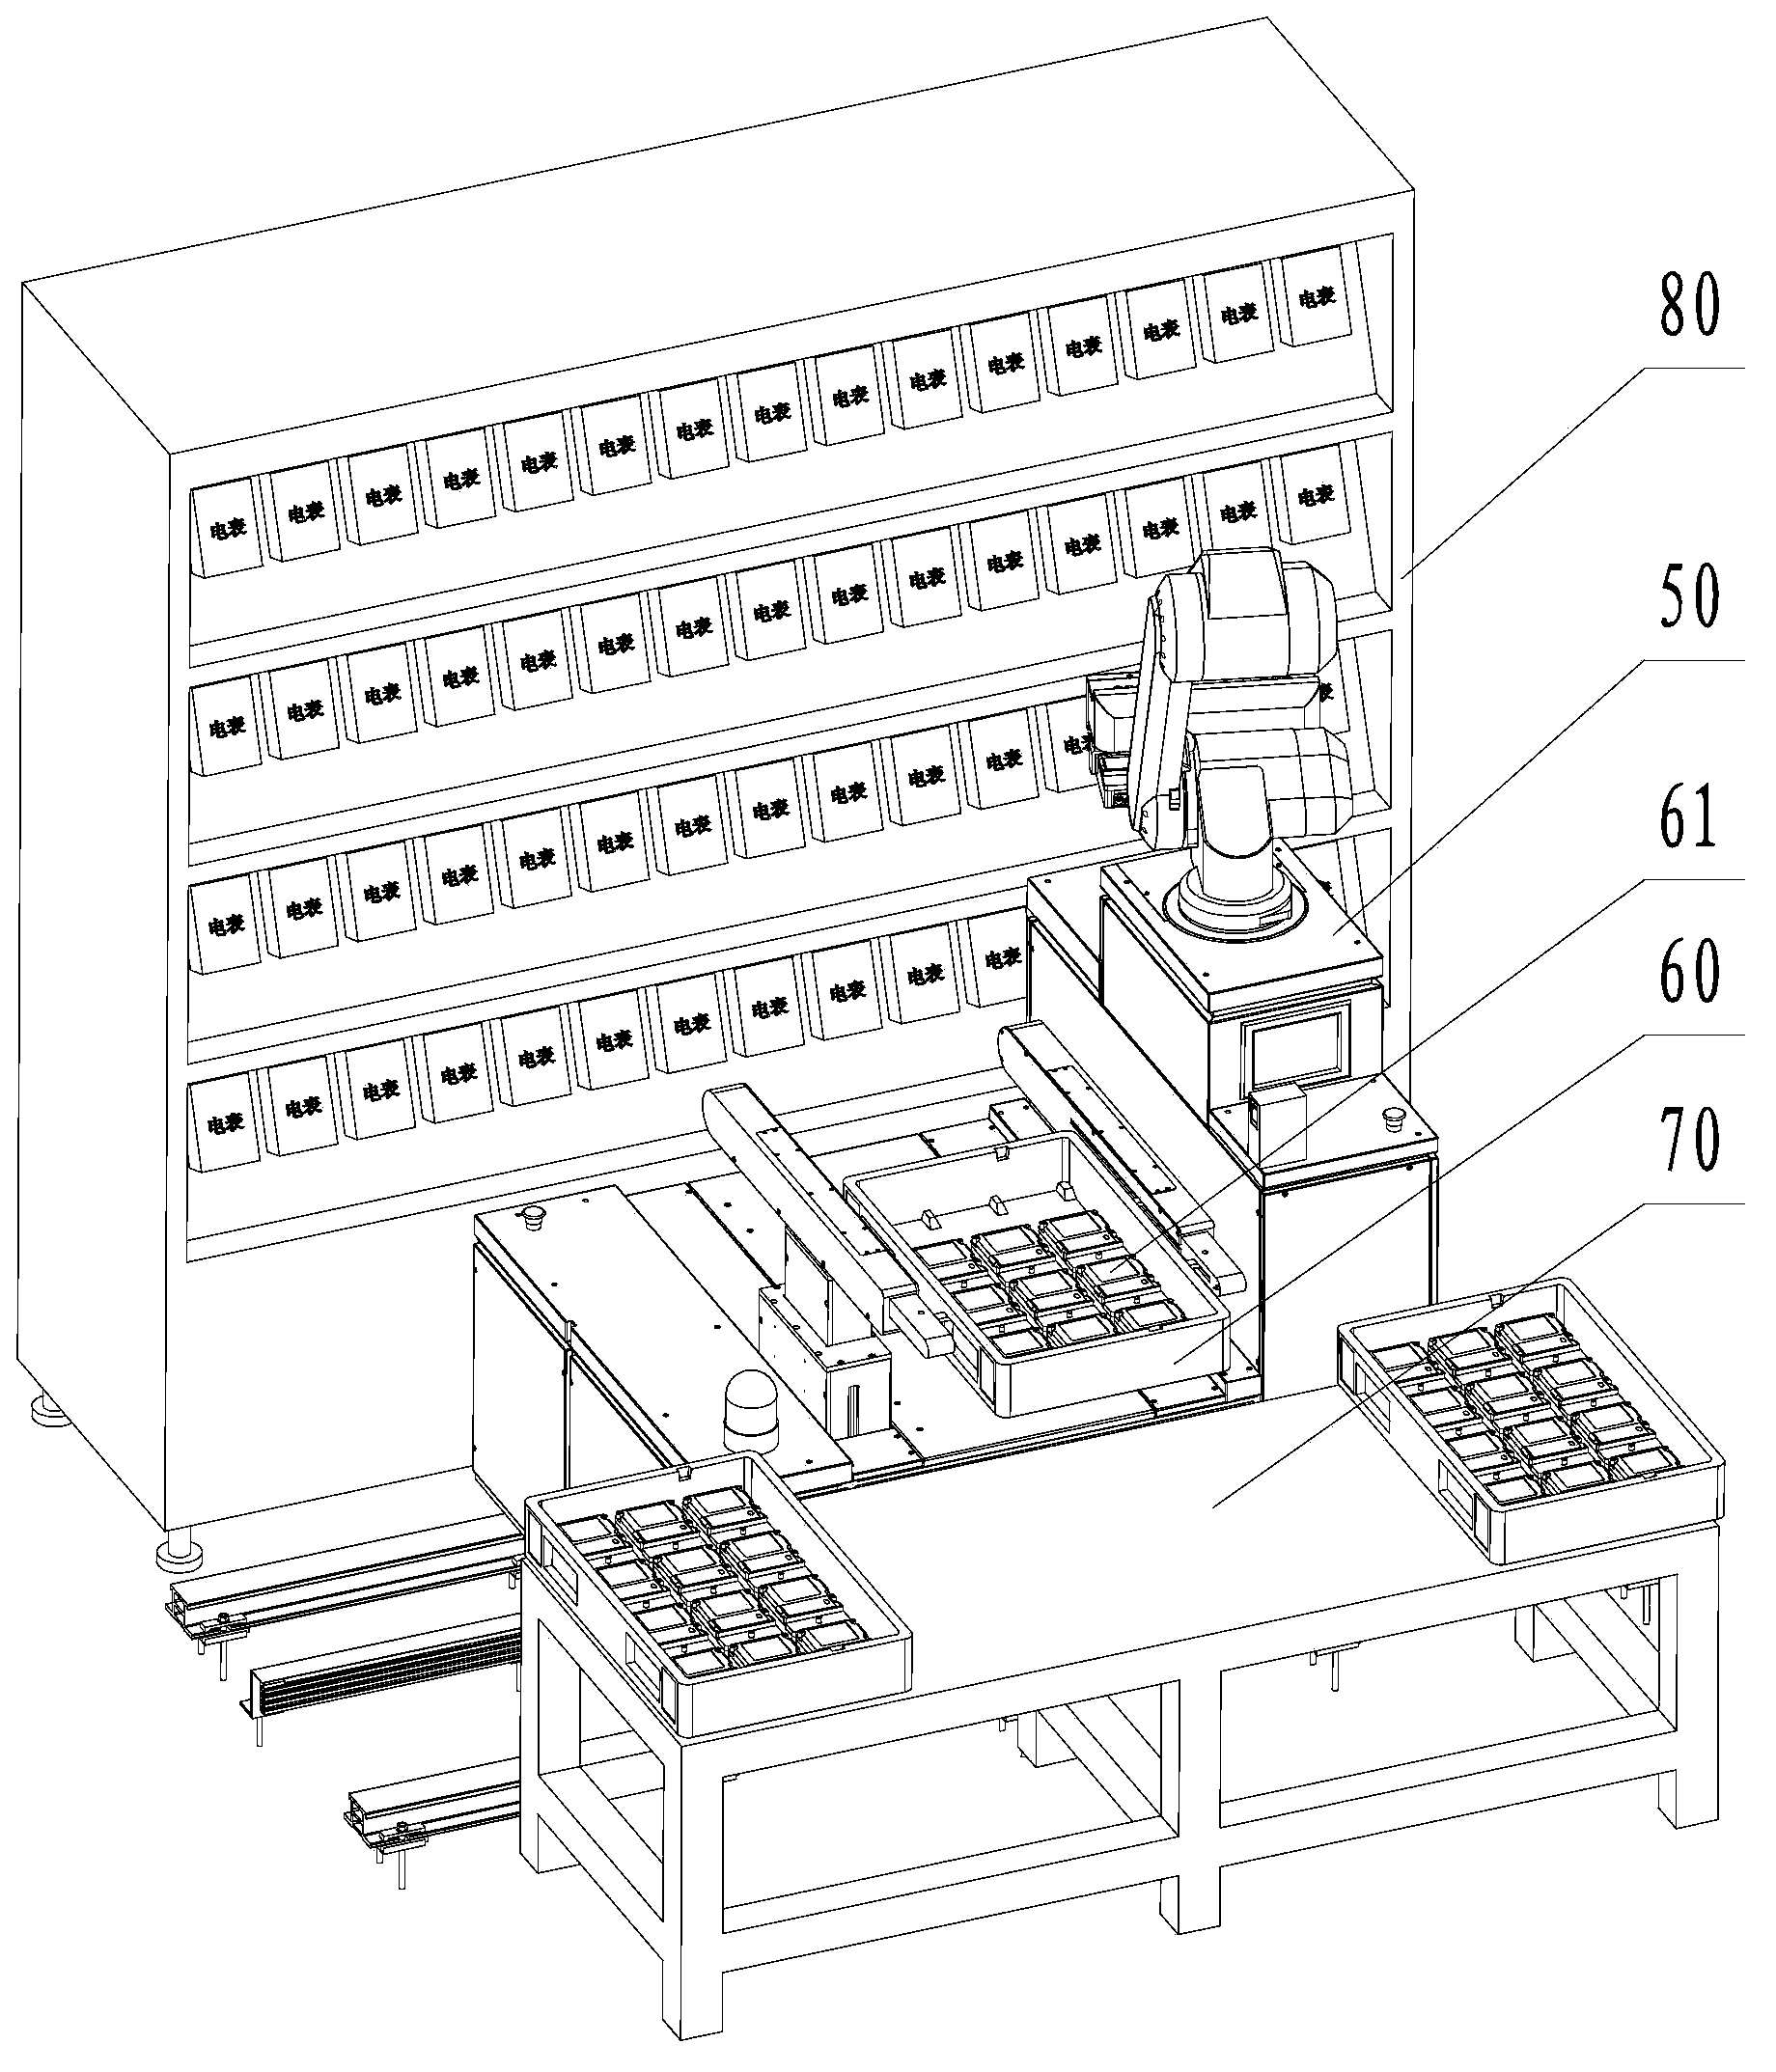 Feeding and discharging device of intelligent mobile robot